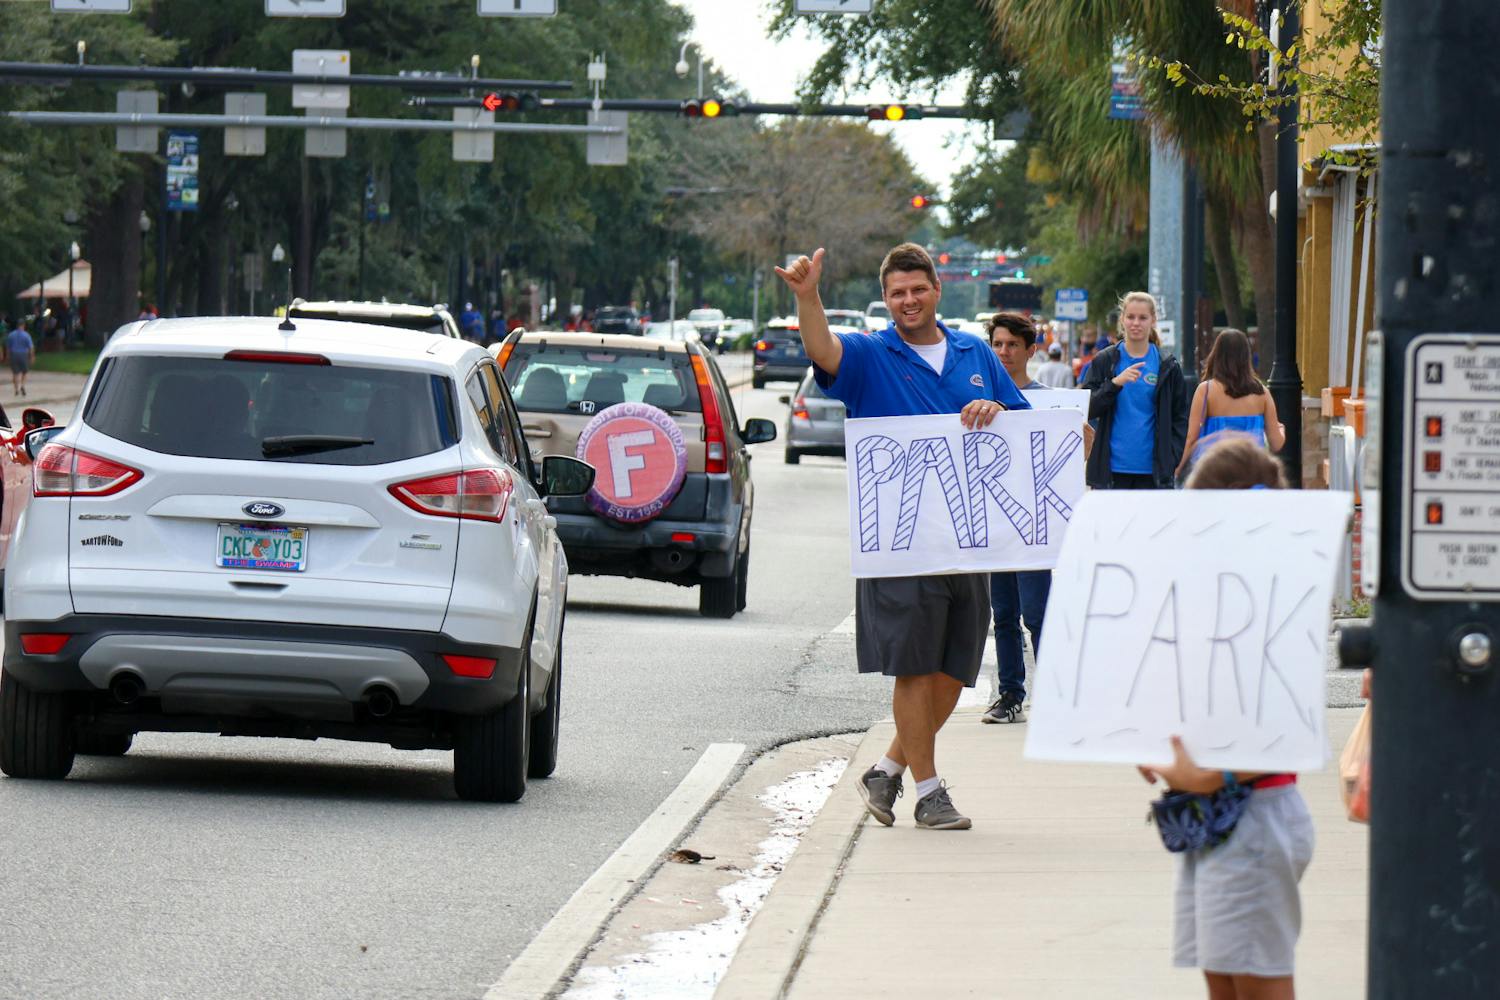 A gator fan advertises parking off of West University Avenue prior to Florida’s game against USF Saturday, Sept 17, 2022.